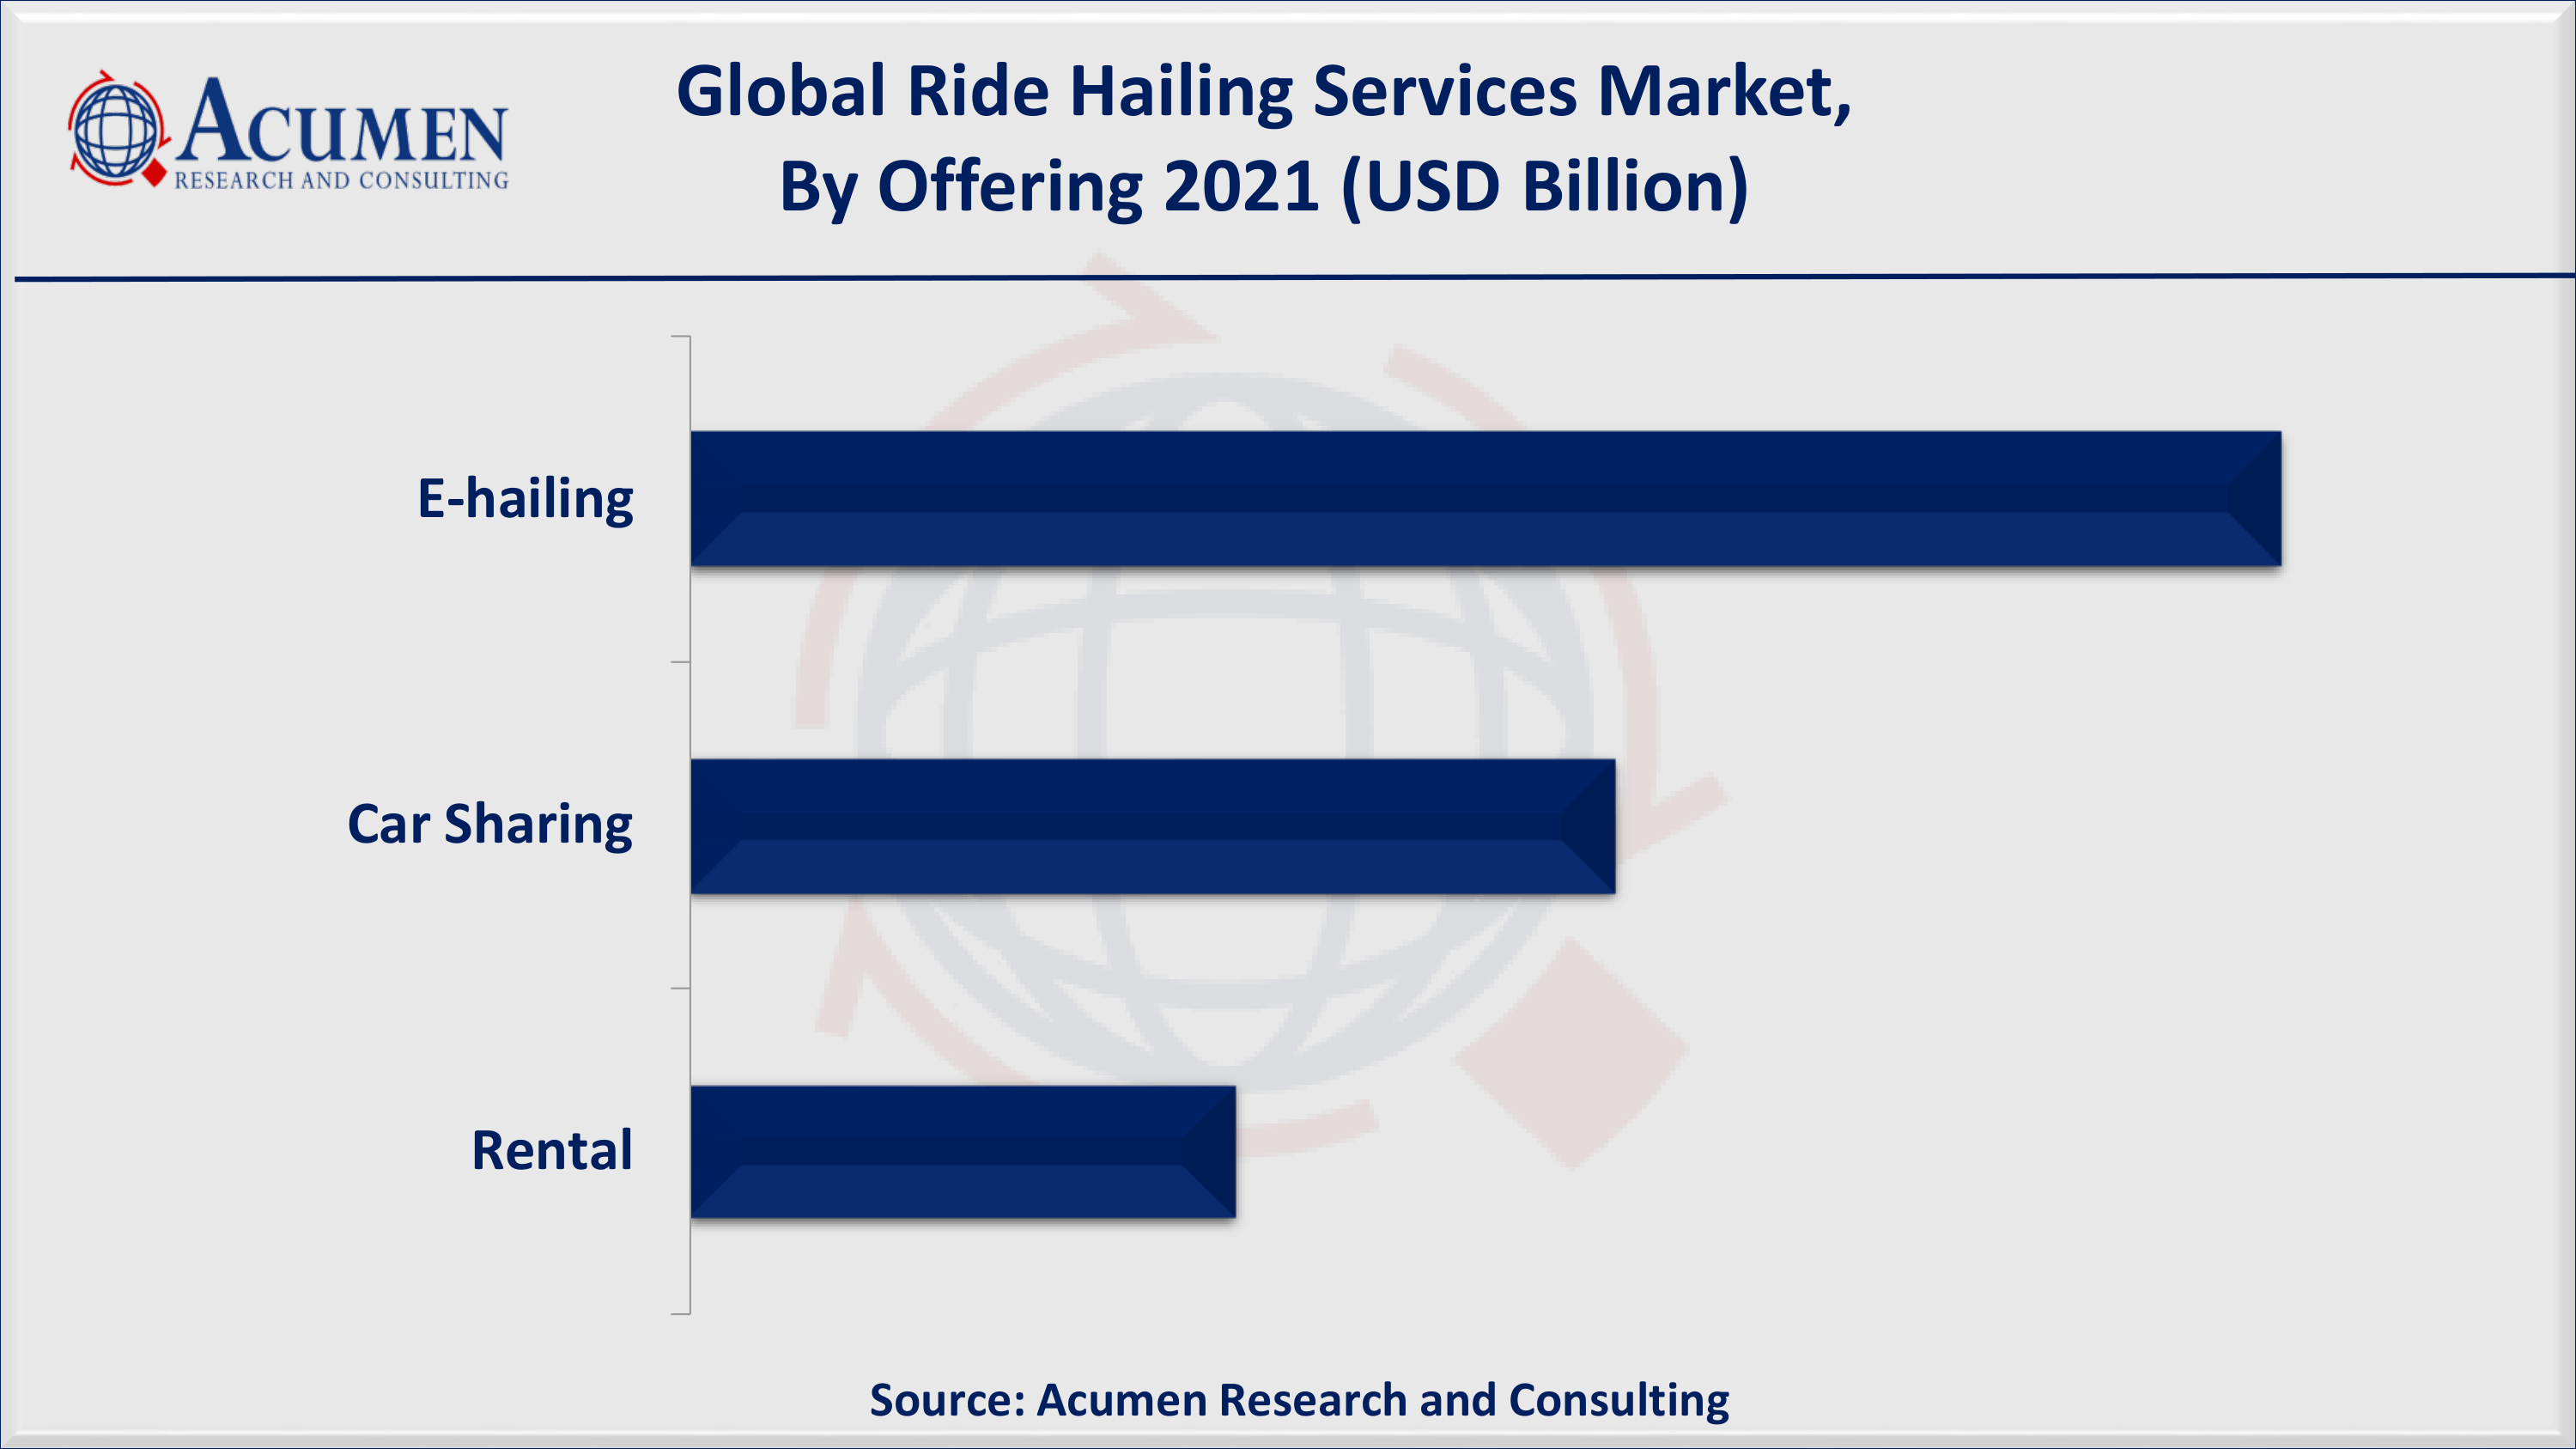 North America ride hailing services market accounted for over 35% regional shares in 2021